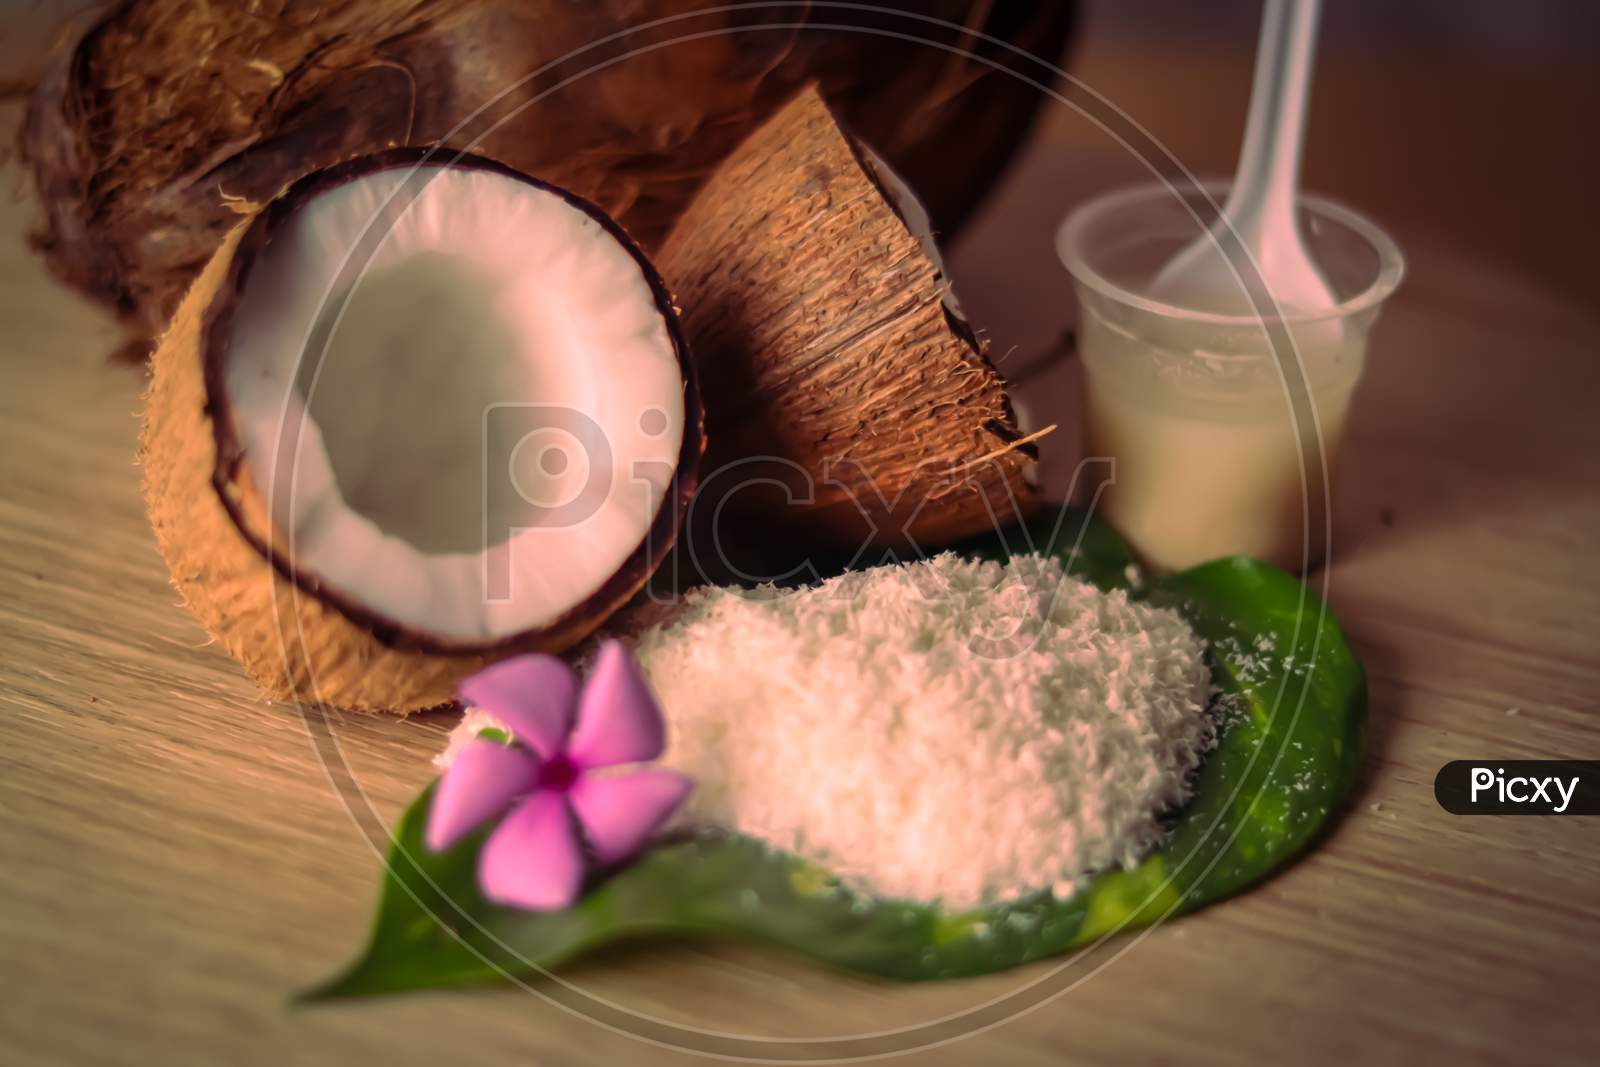 White Coconut And Coconut Powder On Green Leaves Beautiful View,Hd Footage Of Fresh Coconut Family,Healthy Ingredients,Selective Focus On Subject,,Selective Focus On Subject,